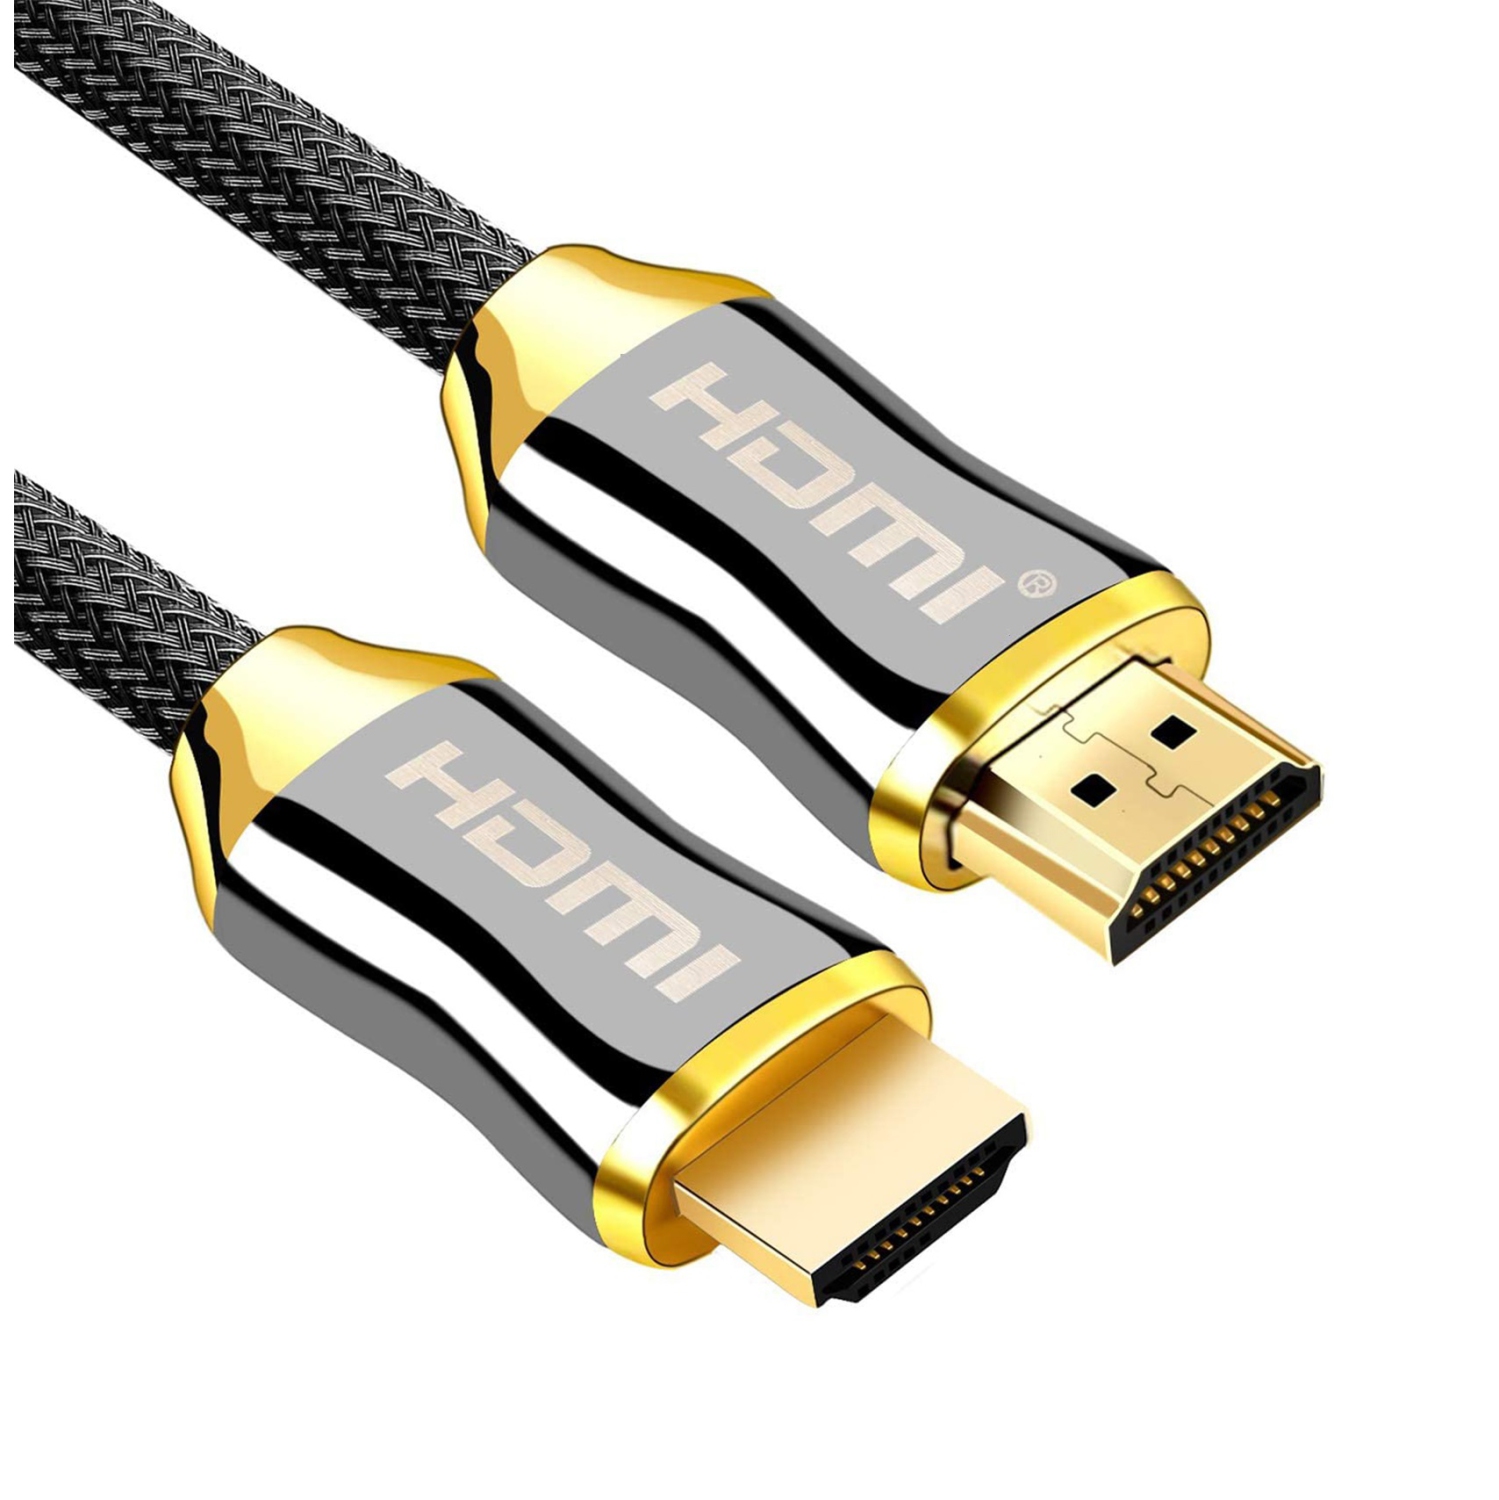 4K 60Hz HDMI Cable HDR, HDCP 2.2/1.4 18Gbps High Speed Audio Video HDMI to HDMI Cable Braided Cord for Samsung LG SONY TCL PS5 PS4 TV box 8K Splitter Switch Box (5M / 16ft)